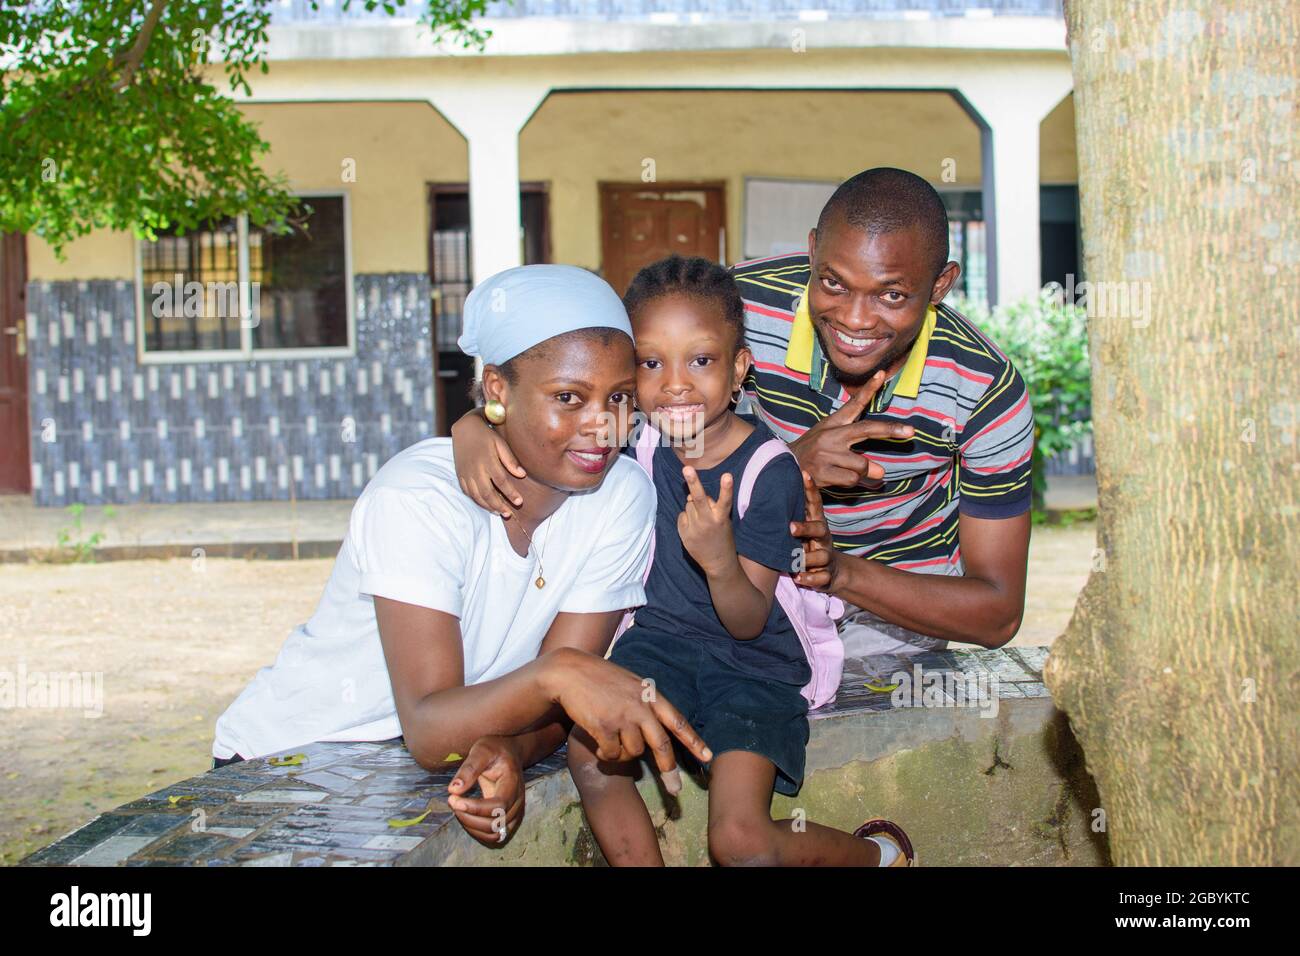 African mother and father or guardian sitting together with their daughter in a school environment, available to help the girl child attain excellence Stock Photo